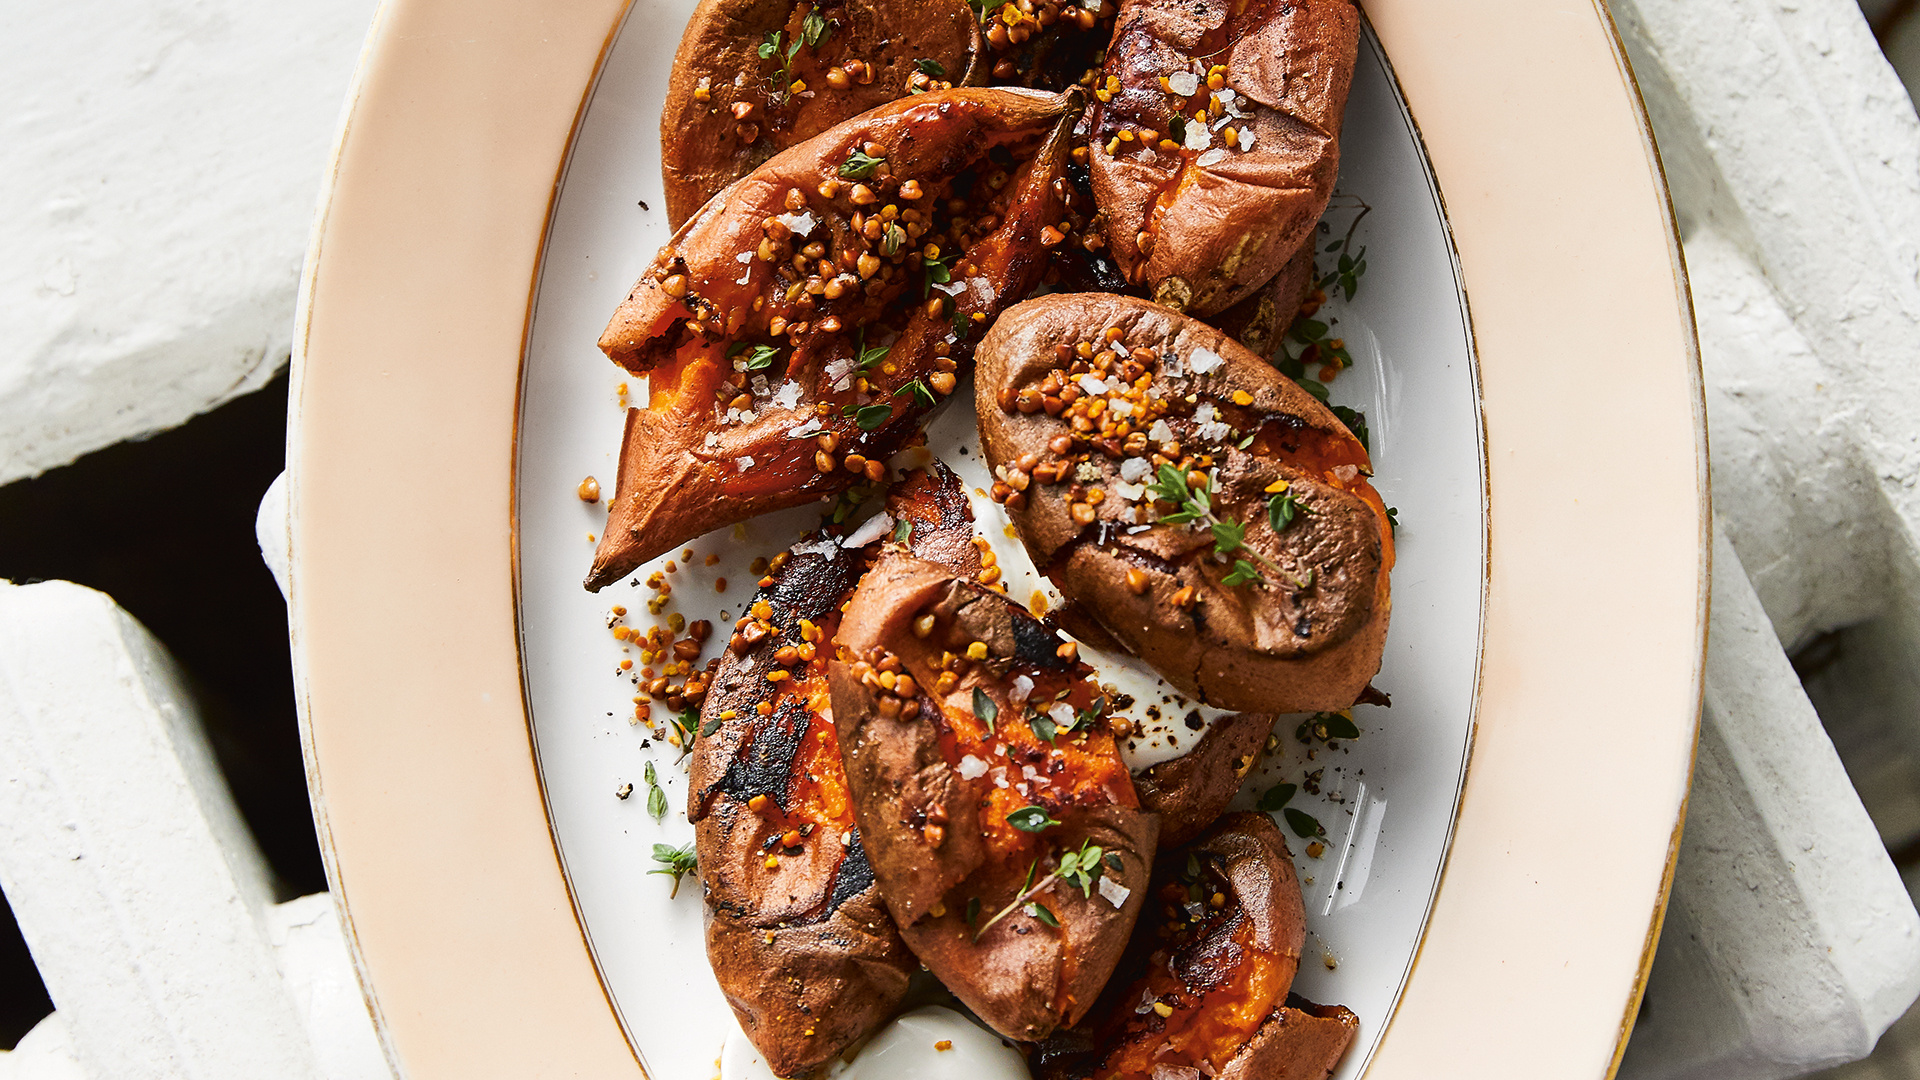 Make Alison Roman’s smashed sweet potatoes with maple syrup and sour